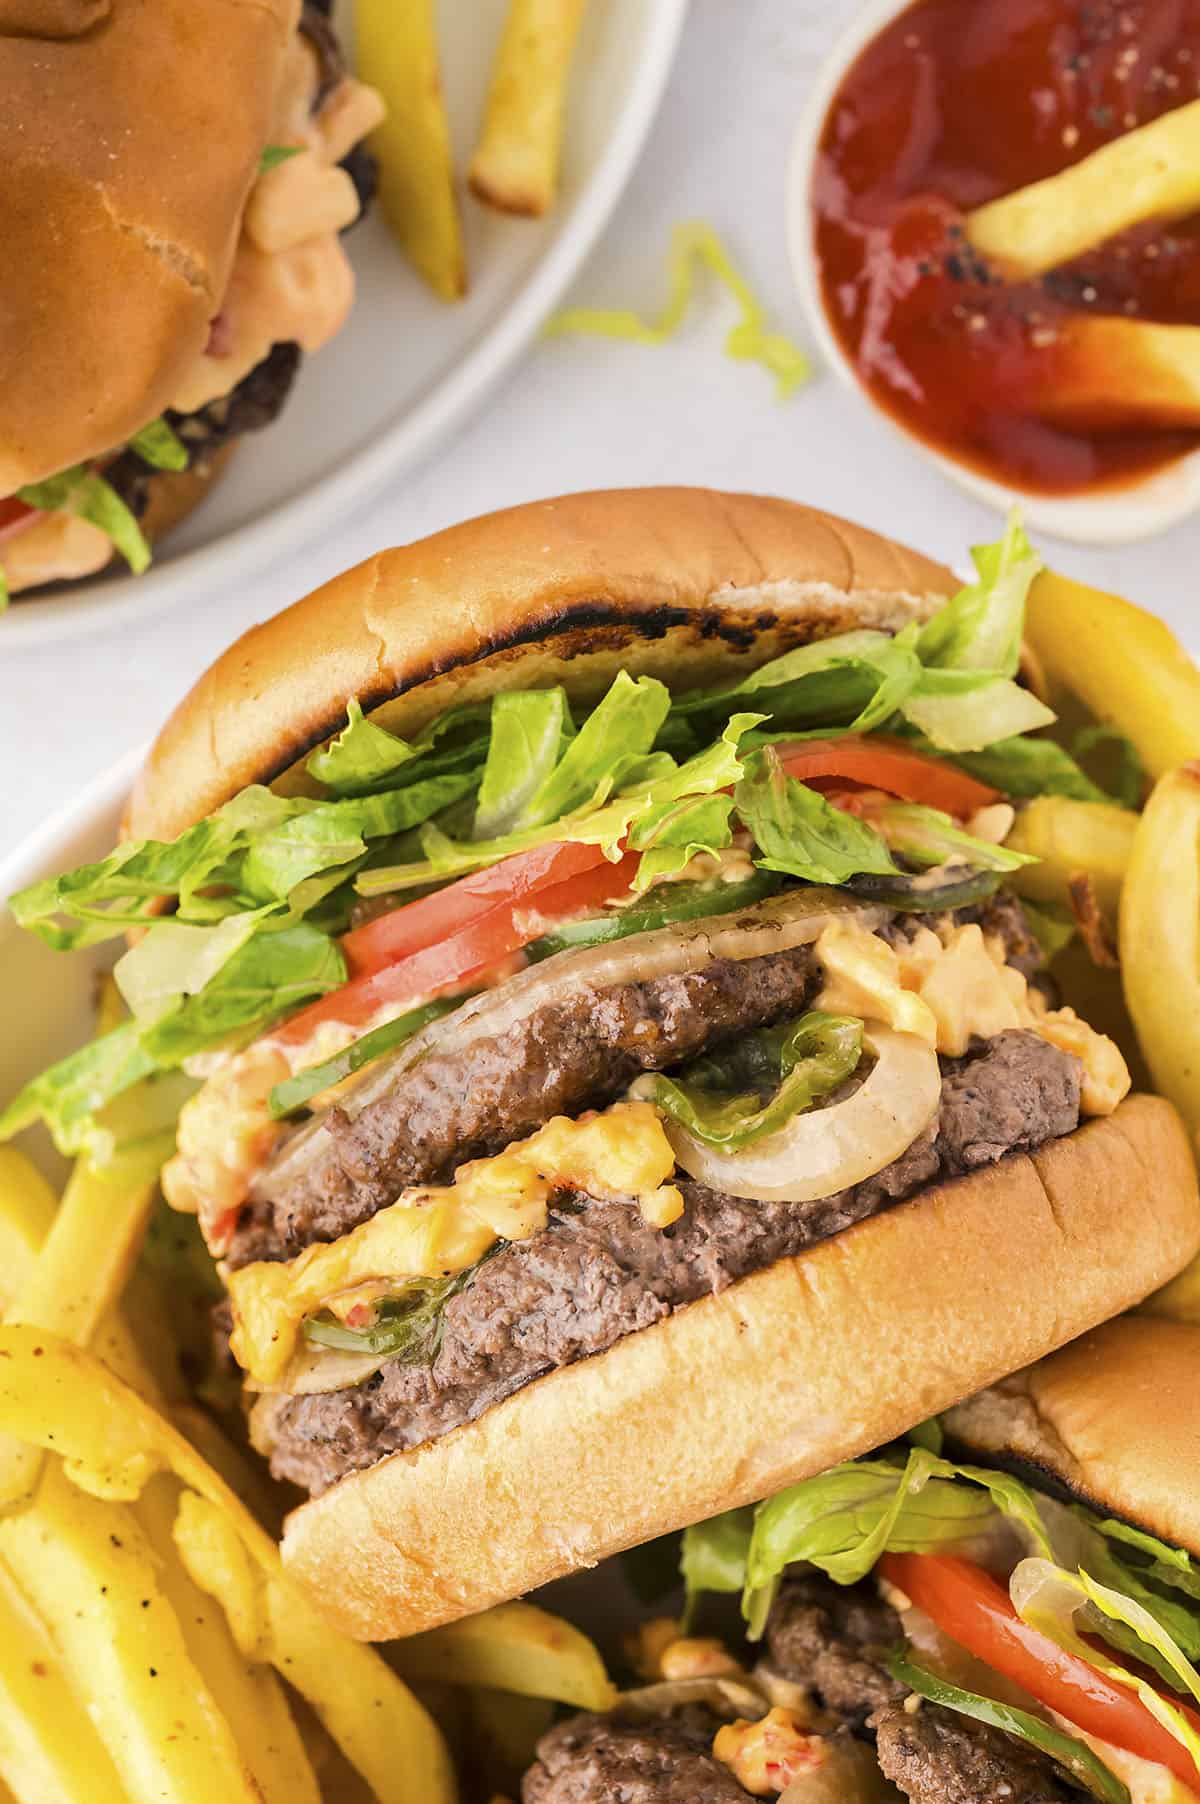 Pimento cheeseburgers surrounded by fries.